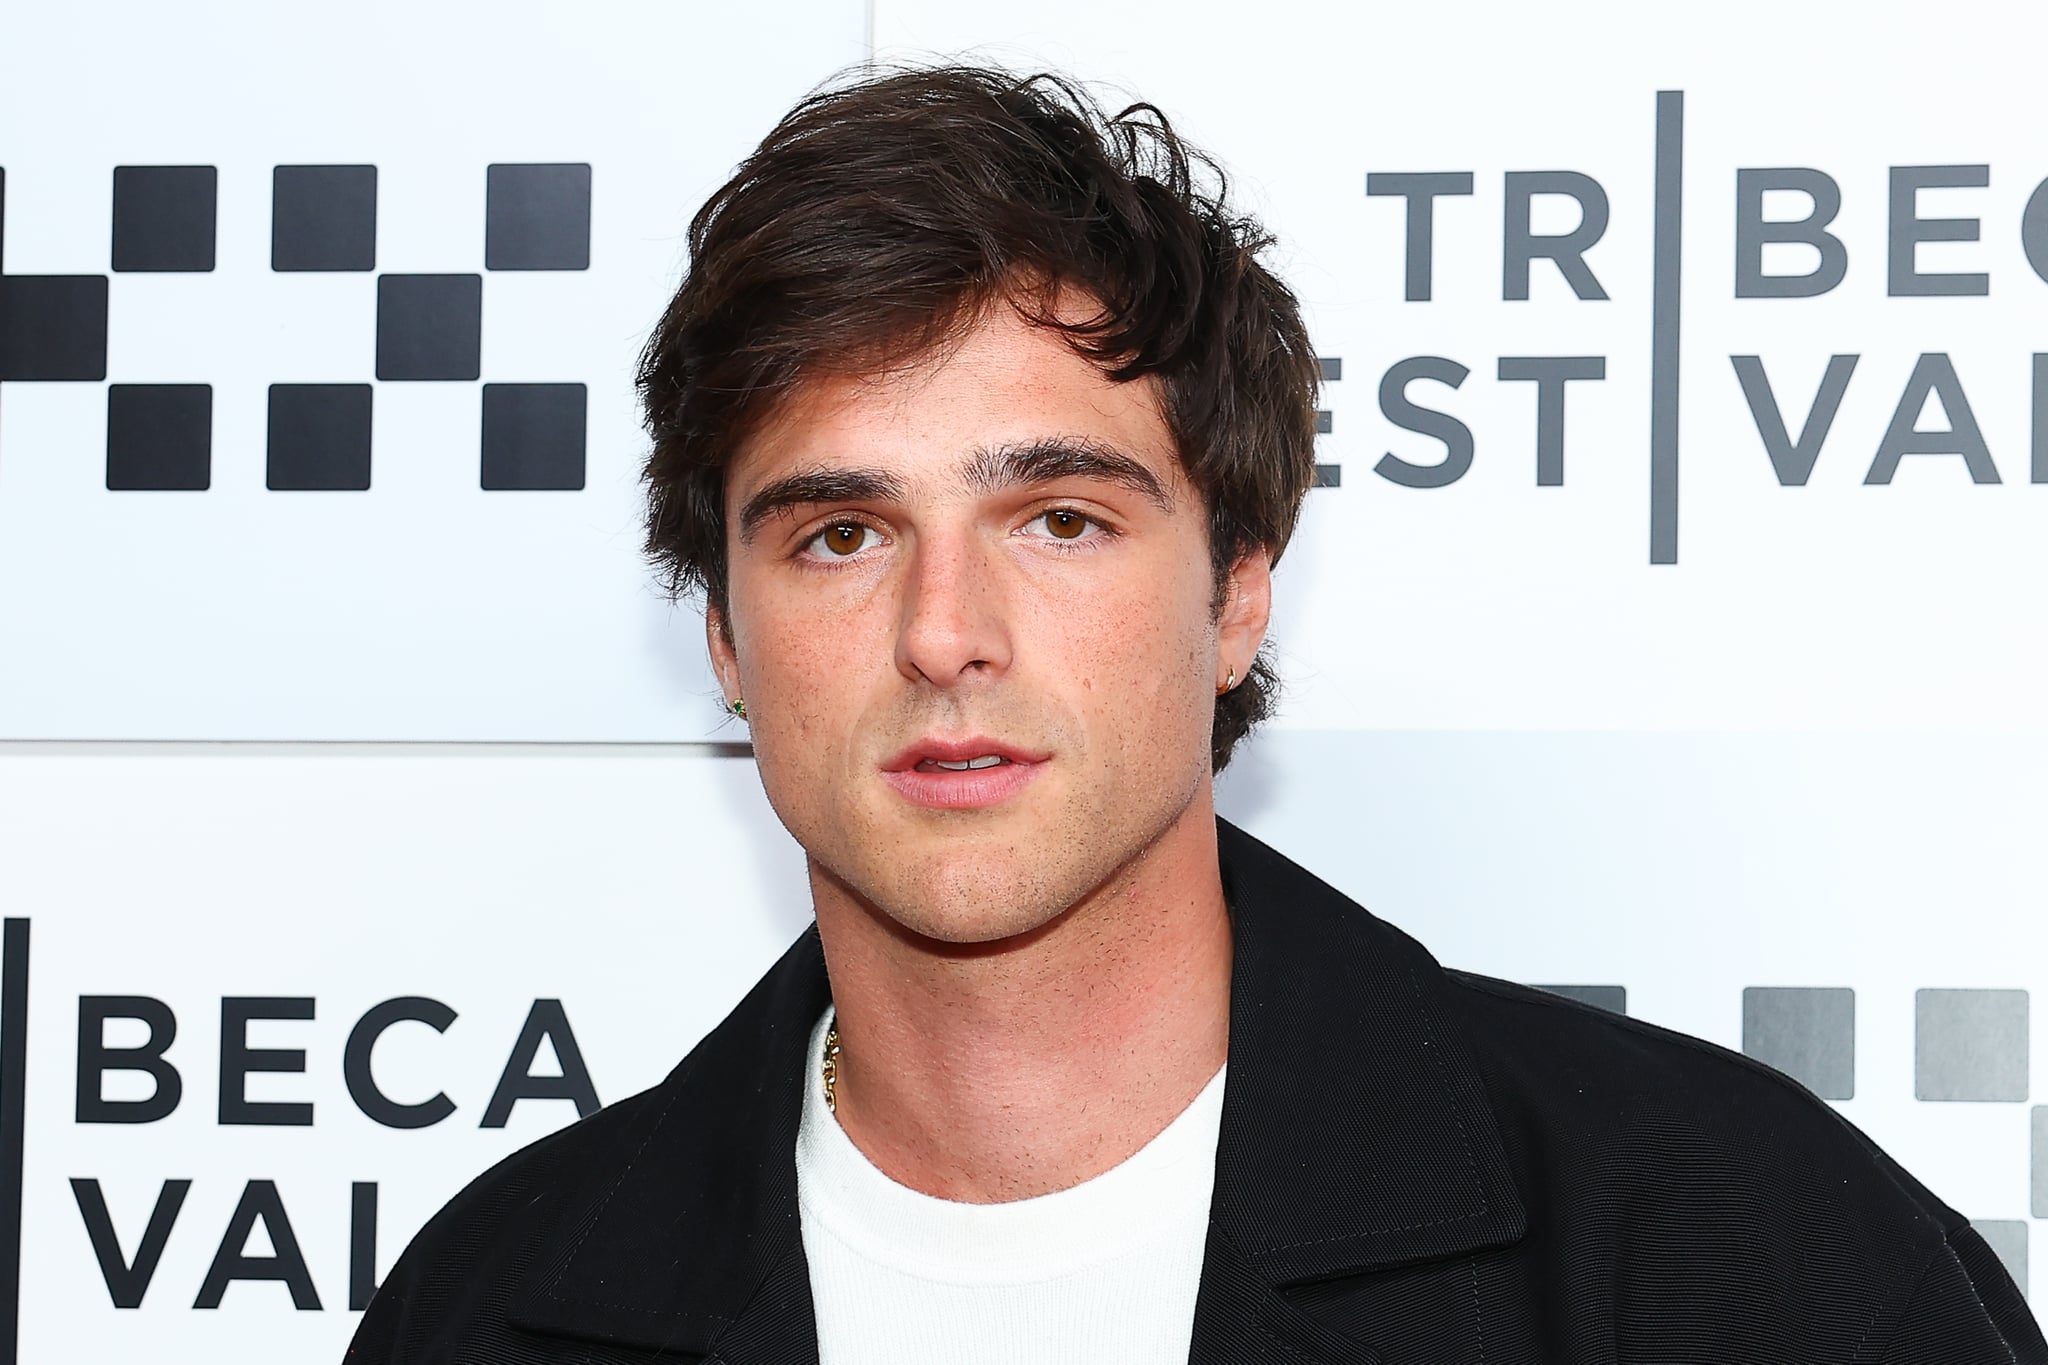 NEW YORK, NEW YORK - JUNE 09: Actor Jacob Elordi attends the